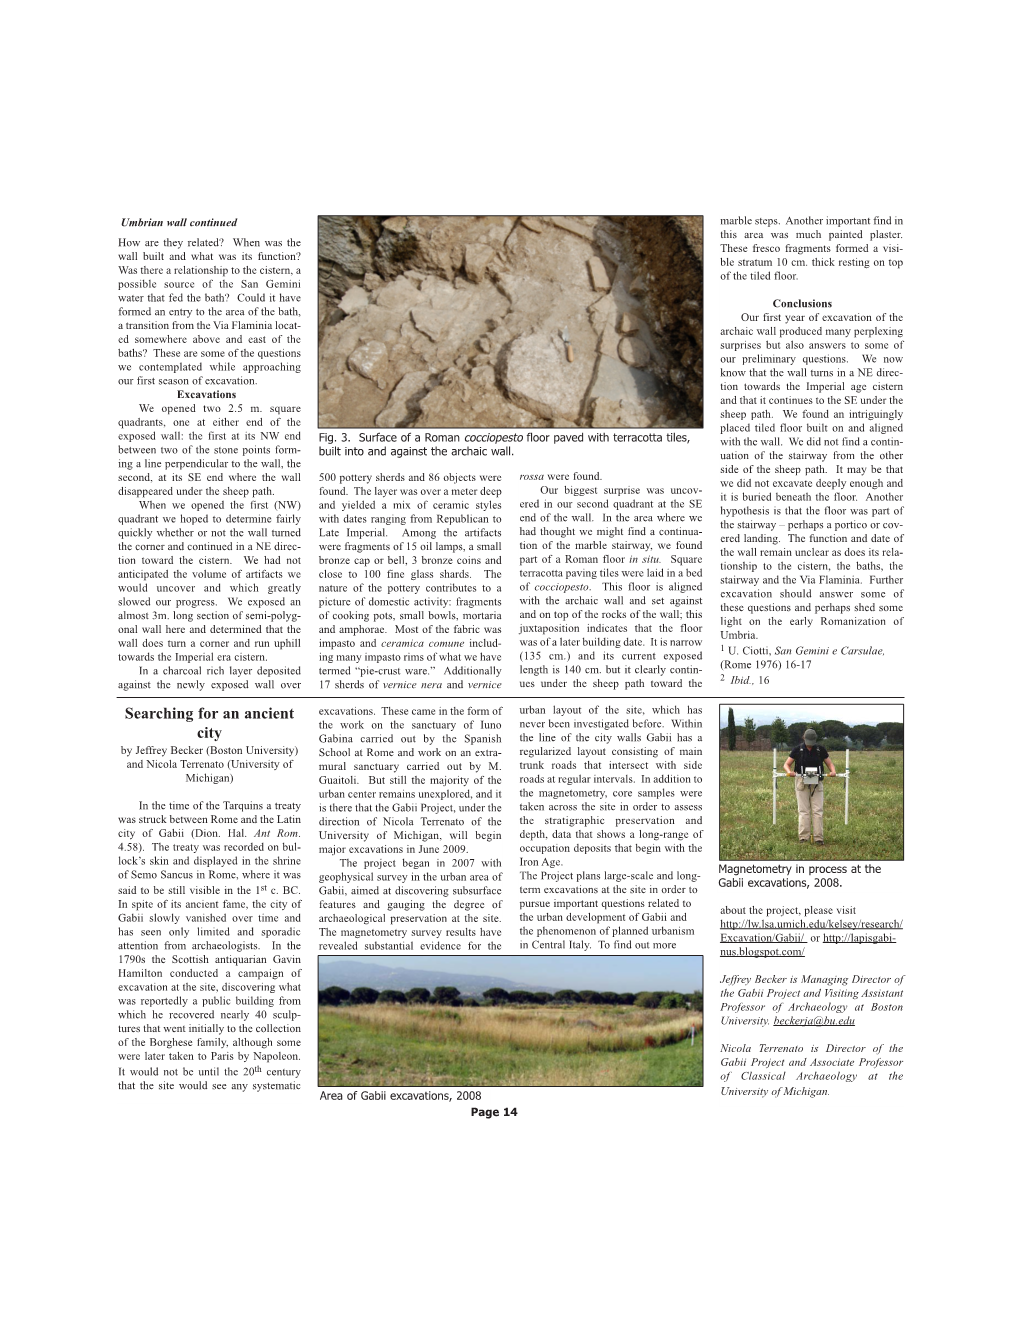 The February 2009 Issue of Etruscan News Featured a Small Article on the Gabii Project's Geophysical